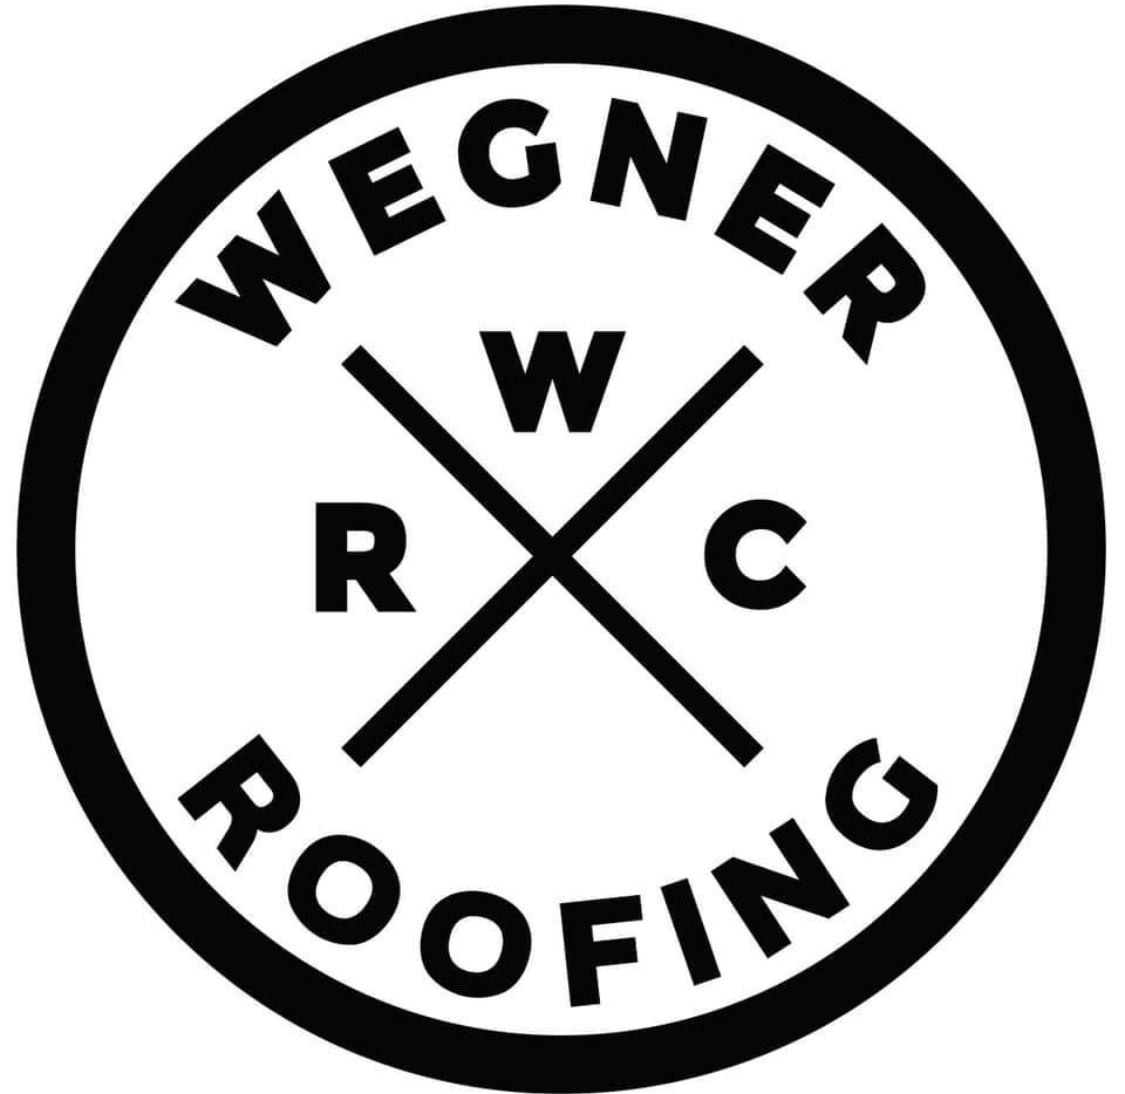 Wegner Roofing and Construction